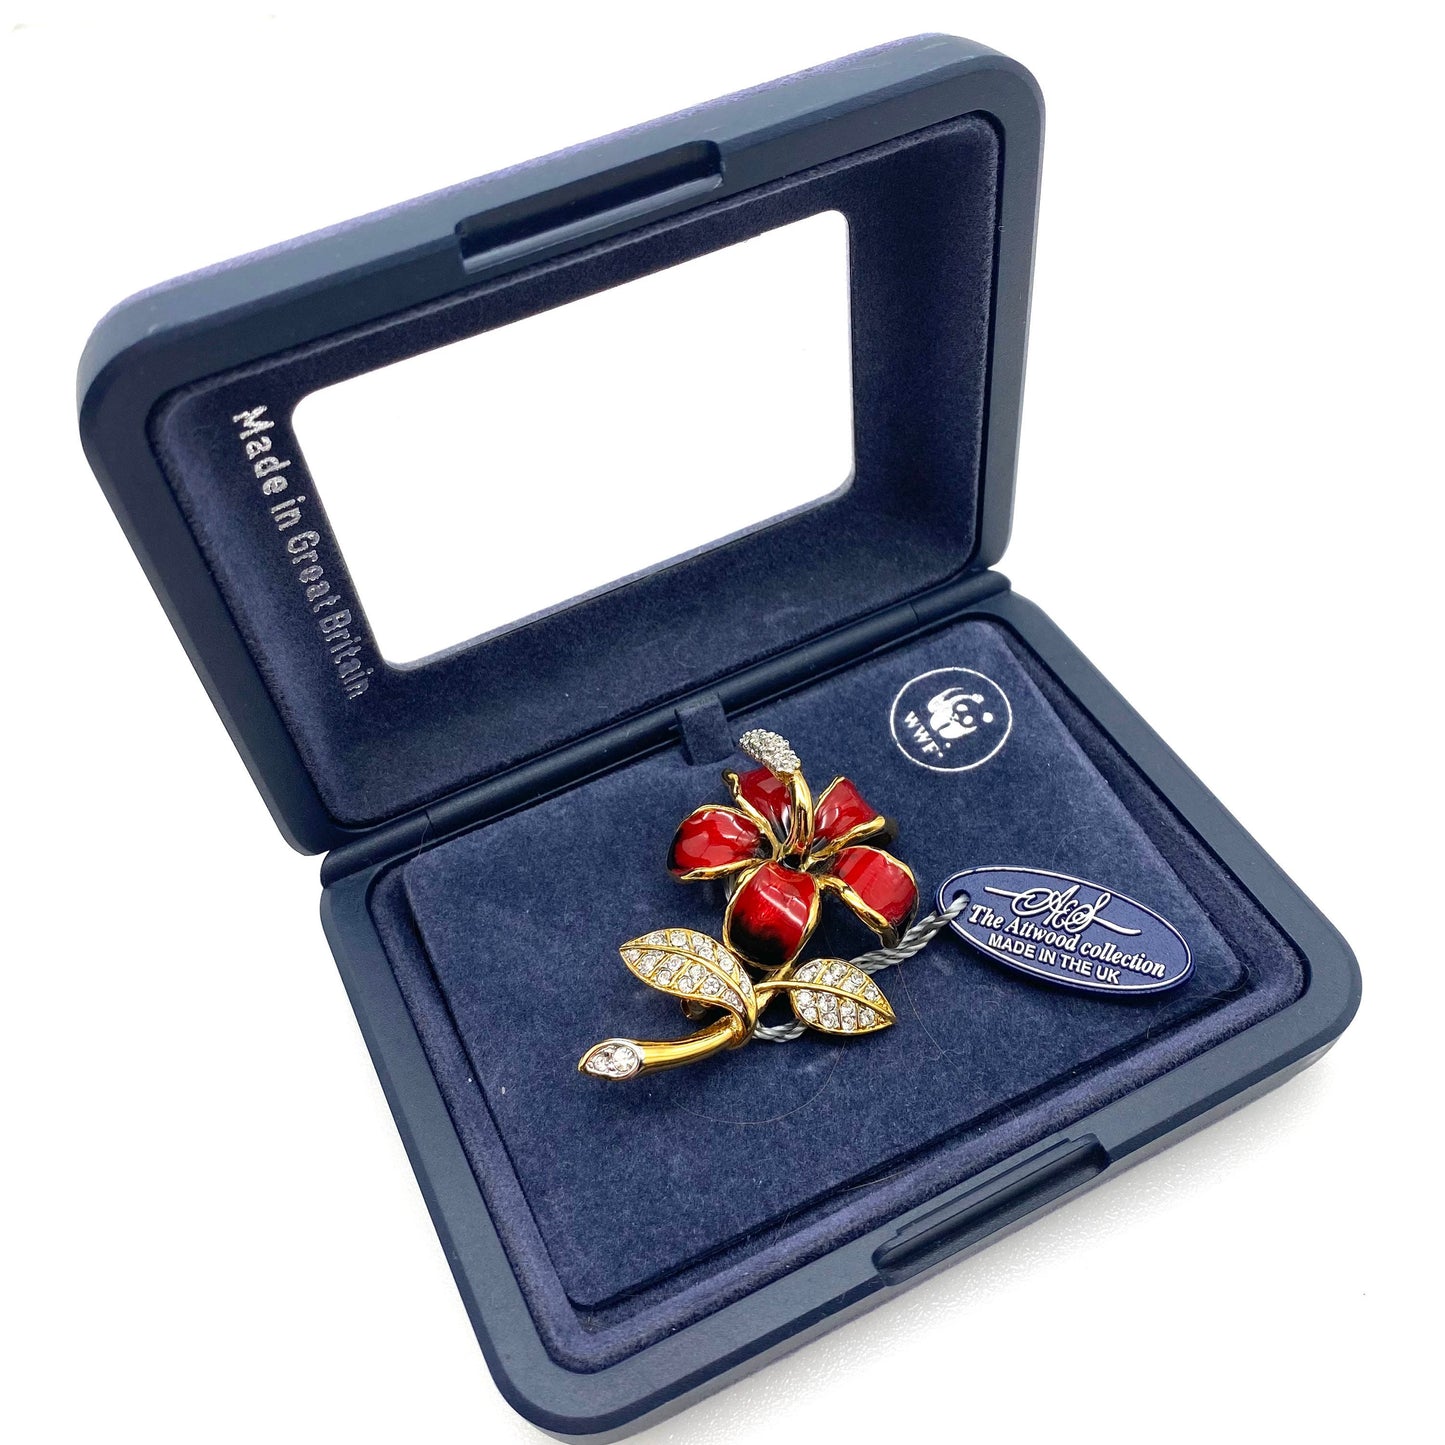 RARE Attwood and Sawyer Gold Plated Red Flower Brooch Air Mauritius The Mauritius Collection in Original Box